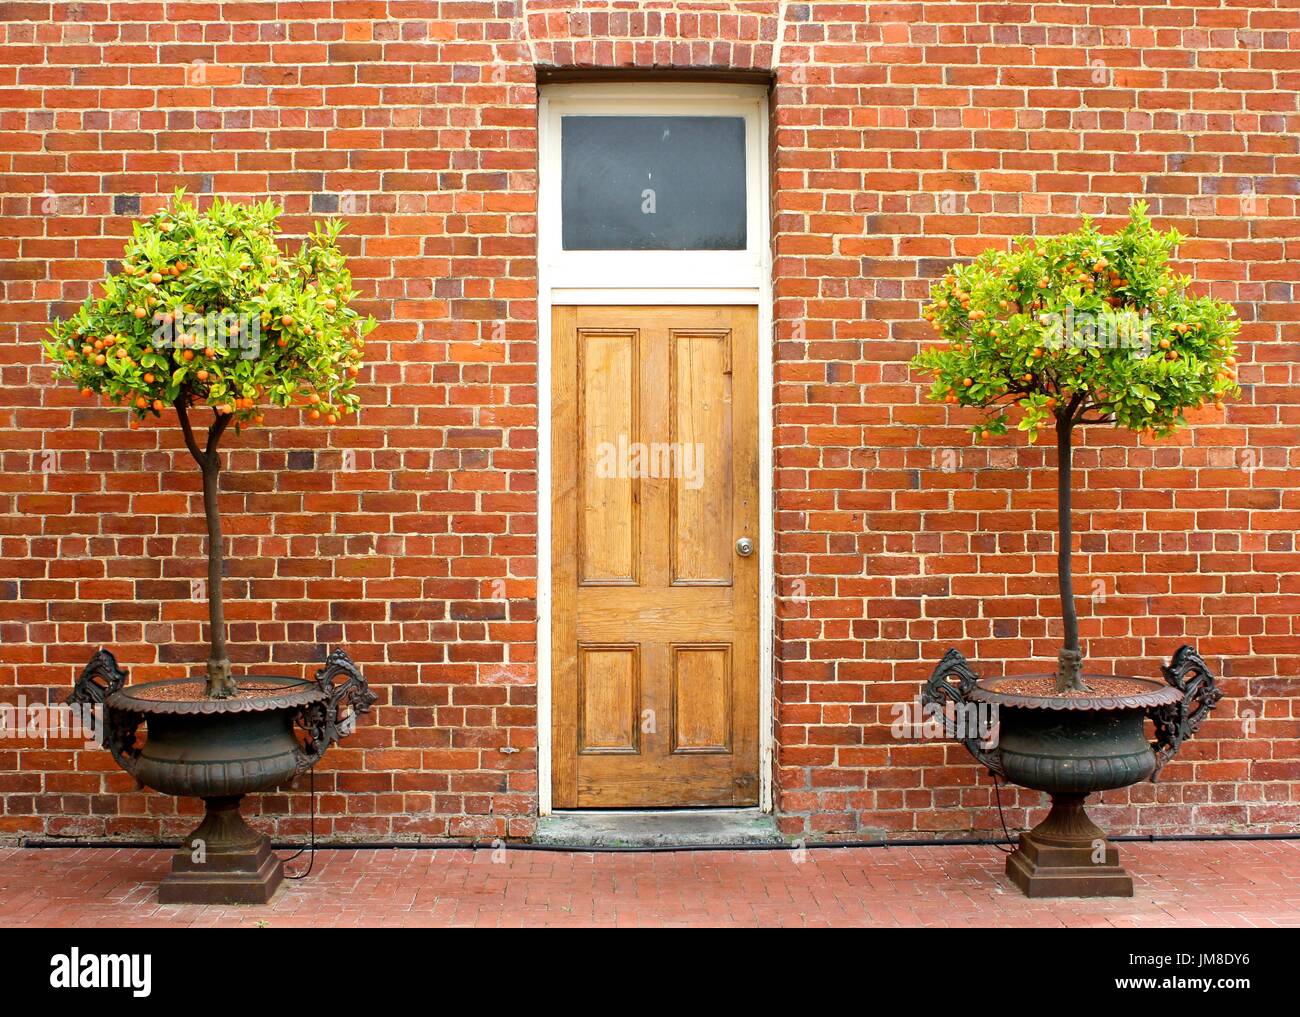 Courtyard with twoTopiary Fruit Tress in vintage Urns standing ajacent to a door against an orange brick wall. Stock Photo